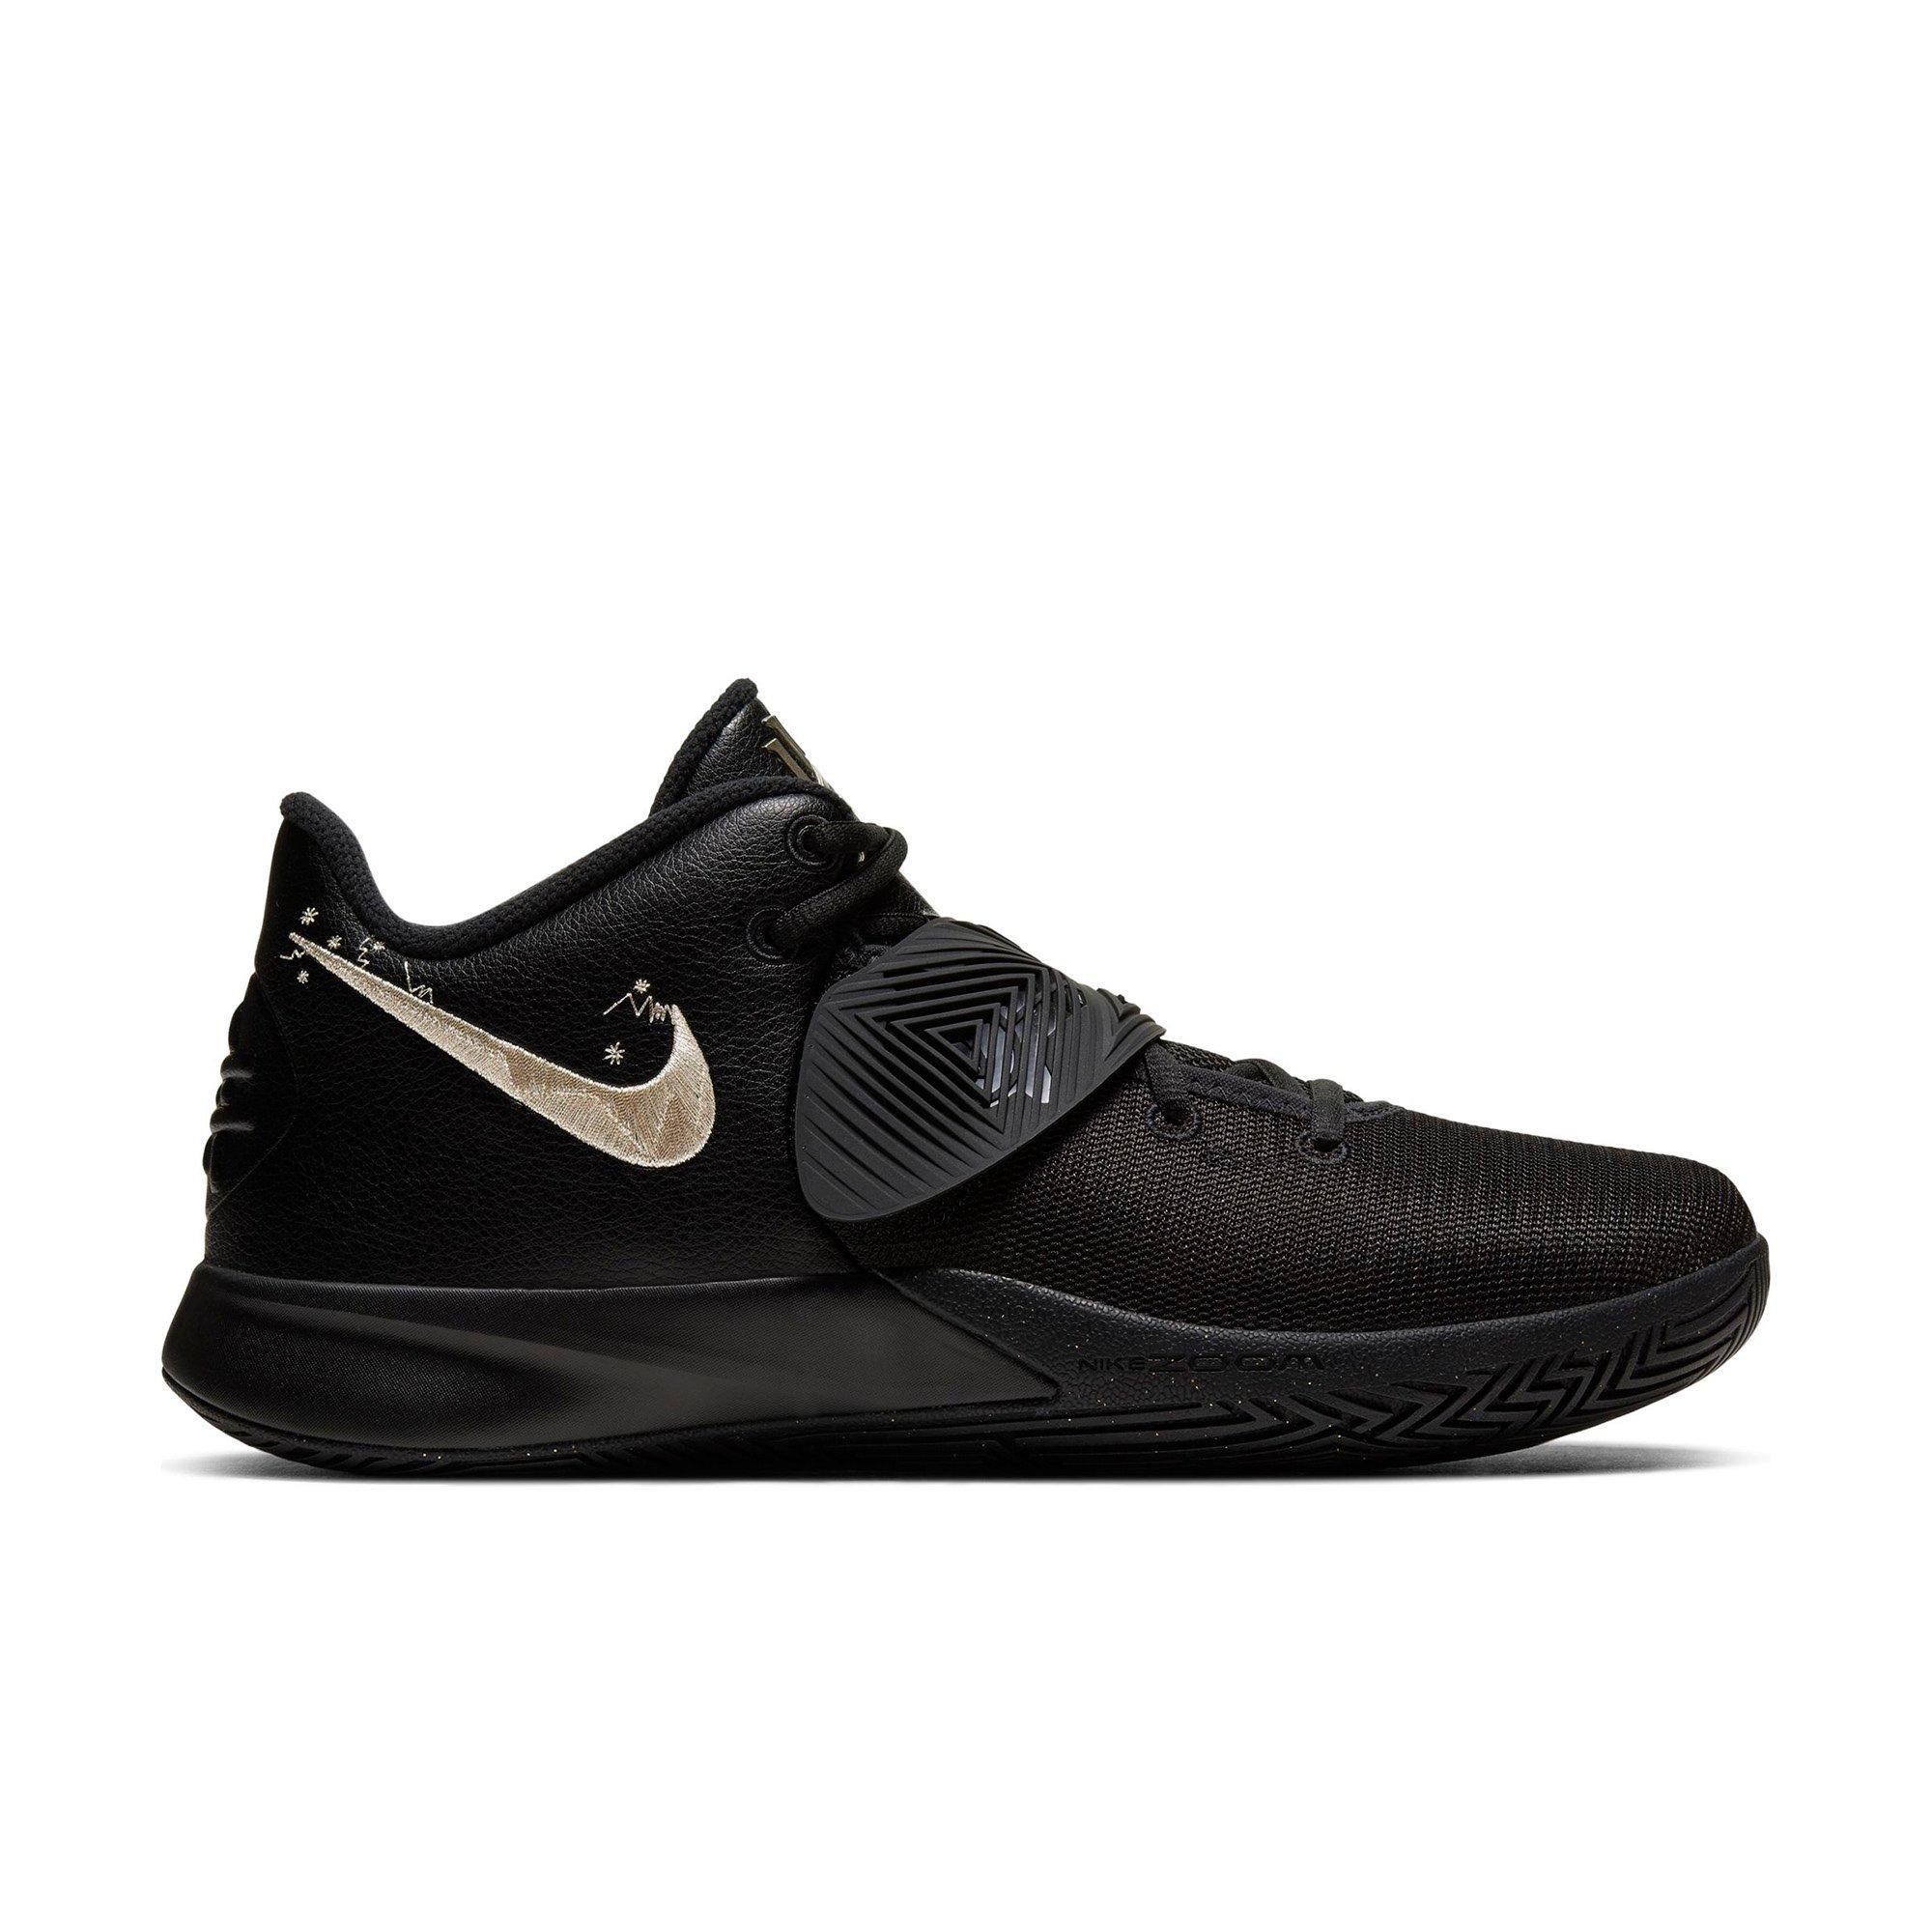 kyrie shoes black and gold